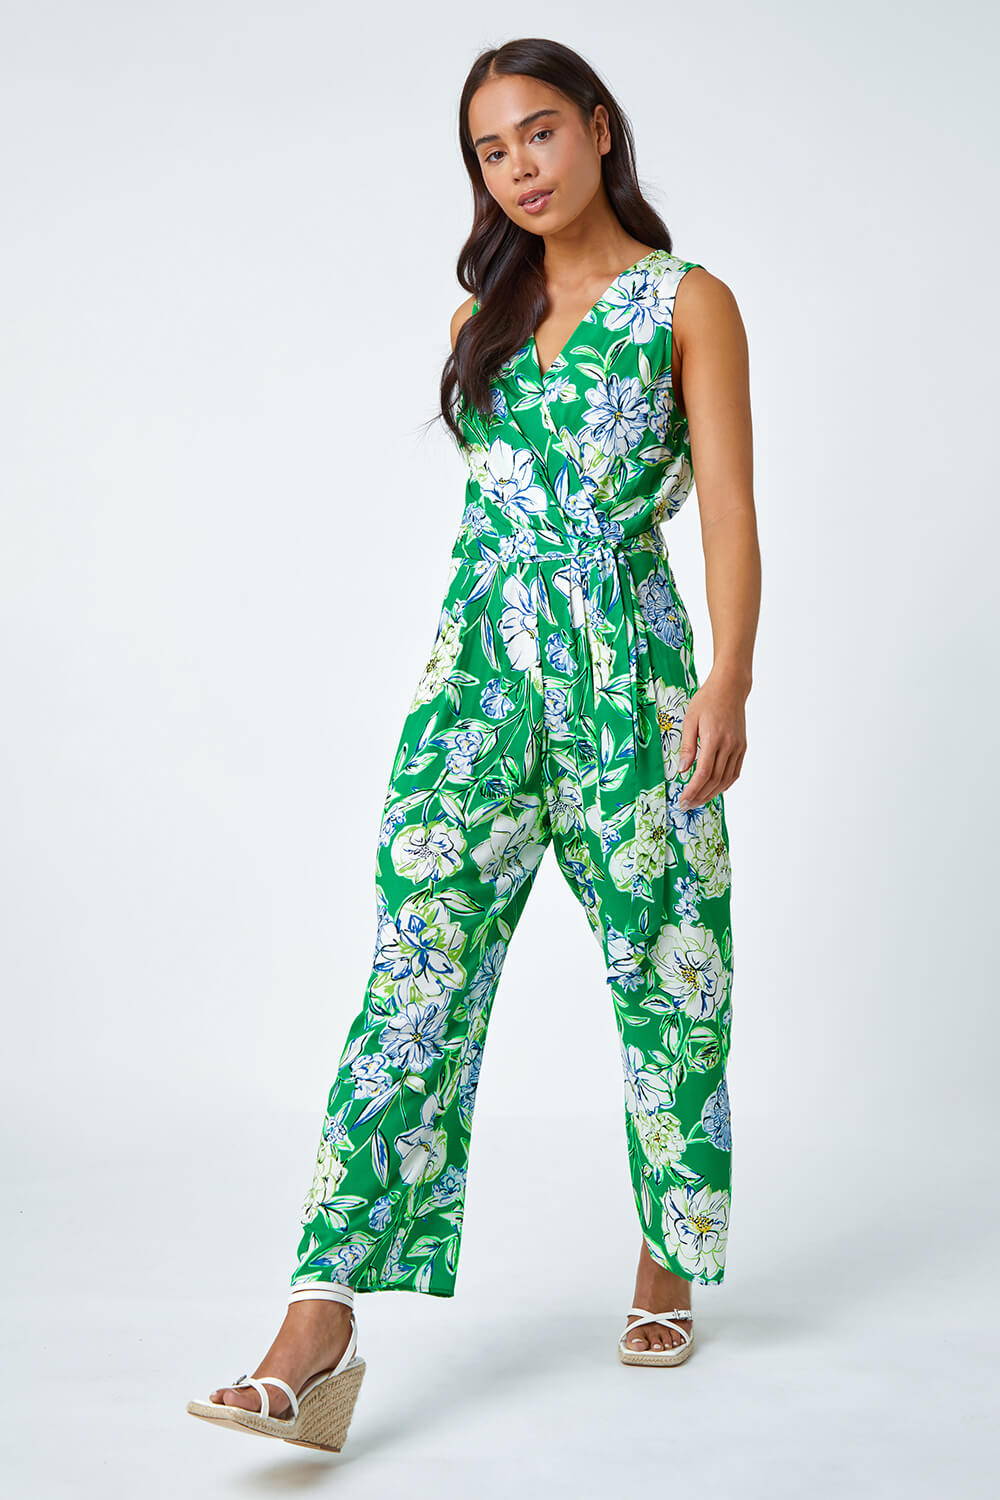 Green Petite Floral Stretch Wrap Jumpsuit, Image 2 of 5